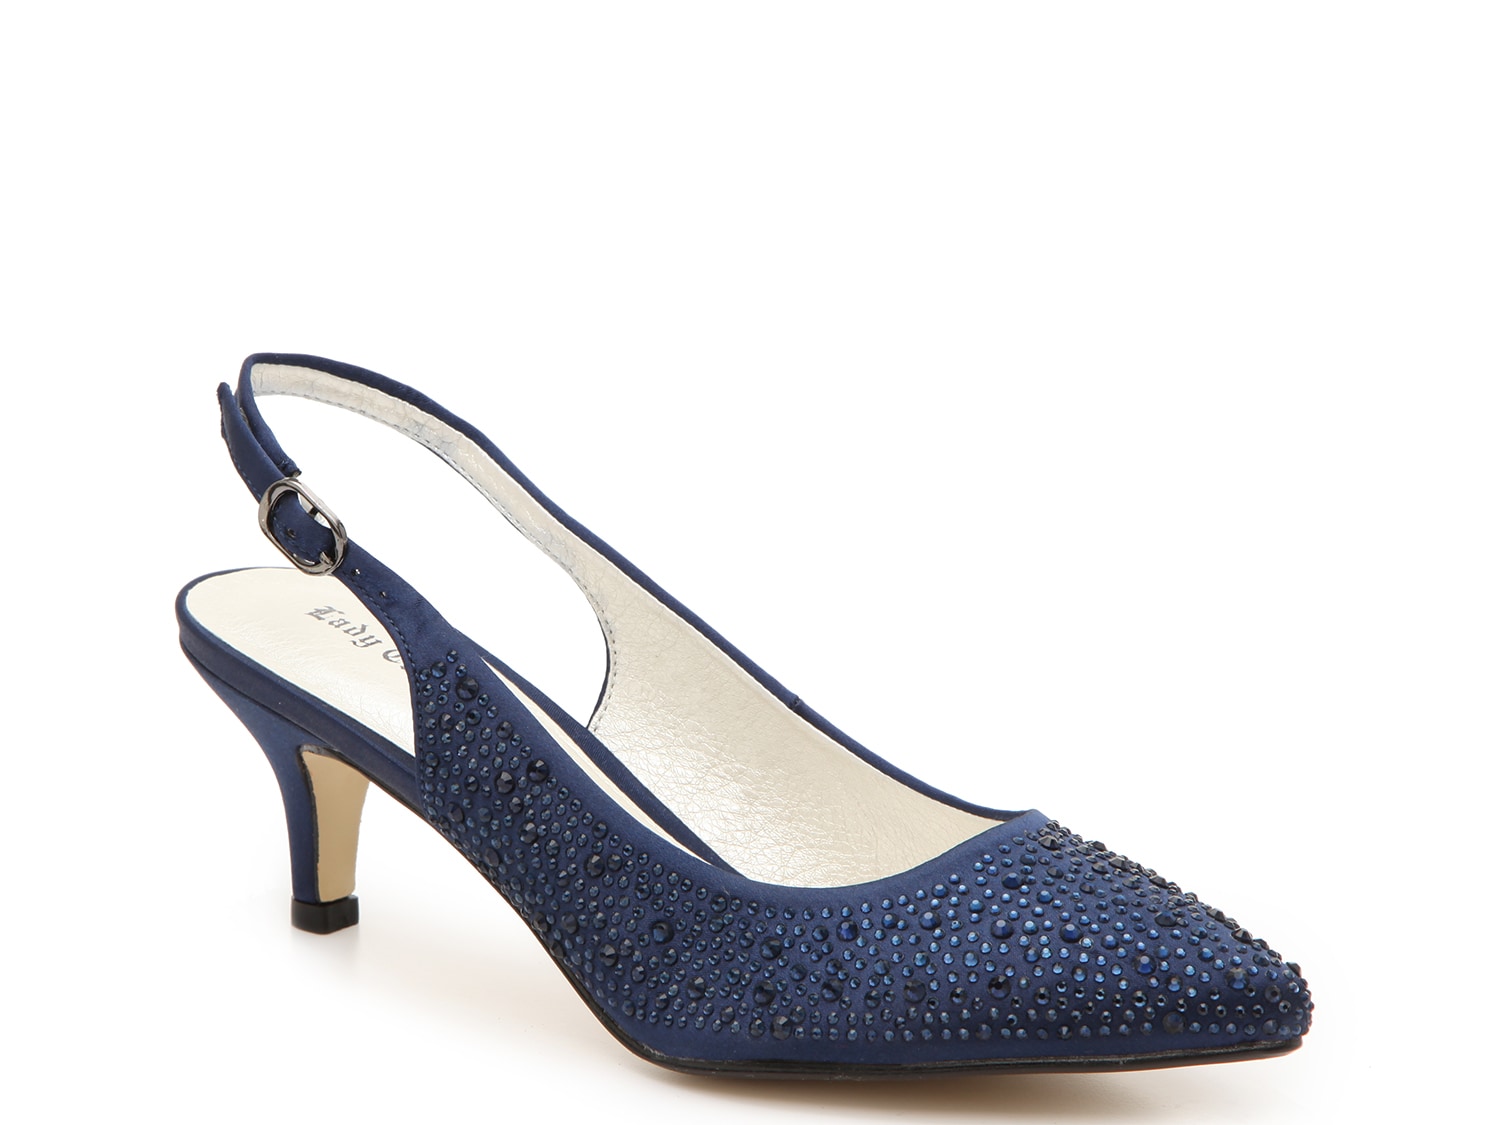 Lady Couture Onyx Pump - Free Shipping | DSW